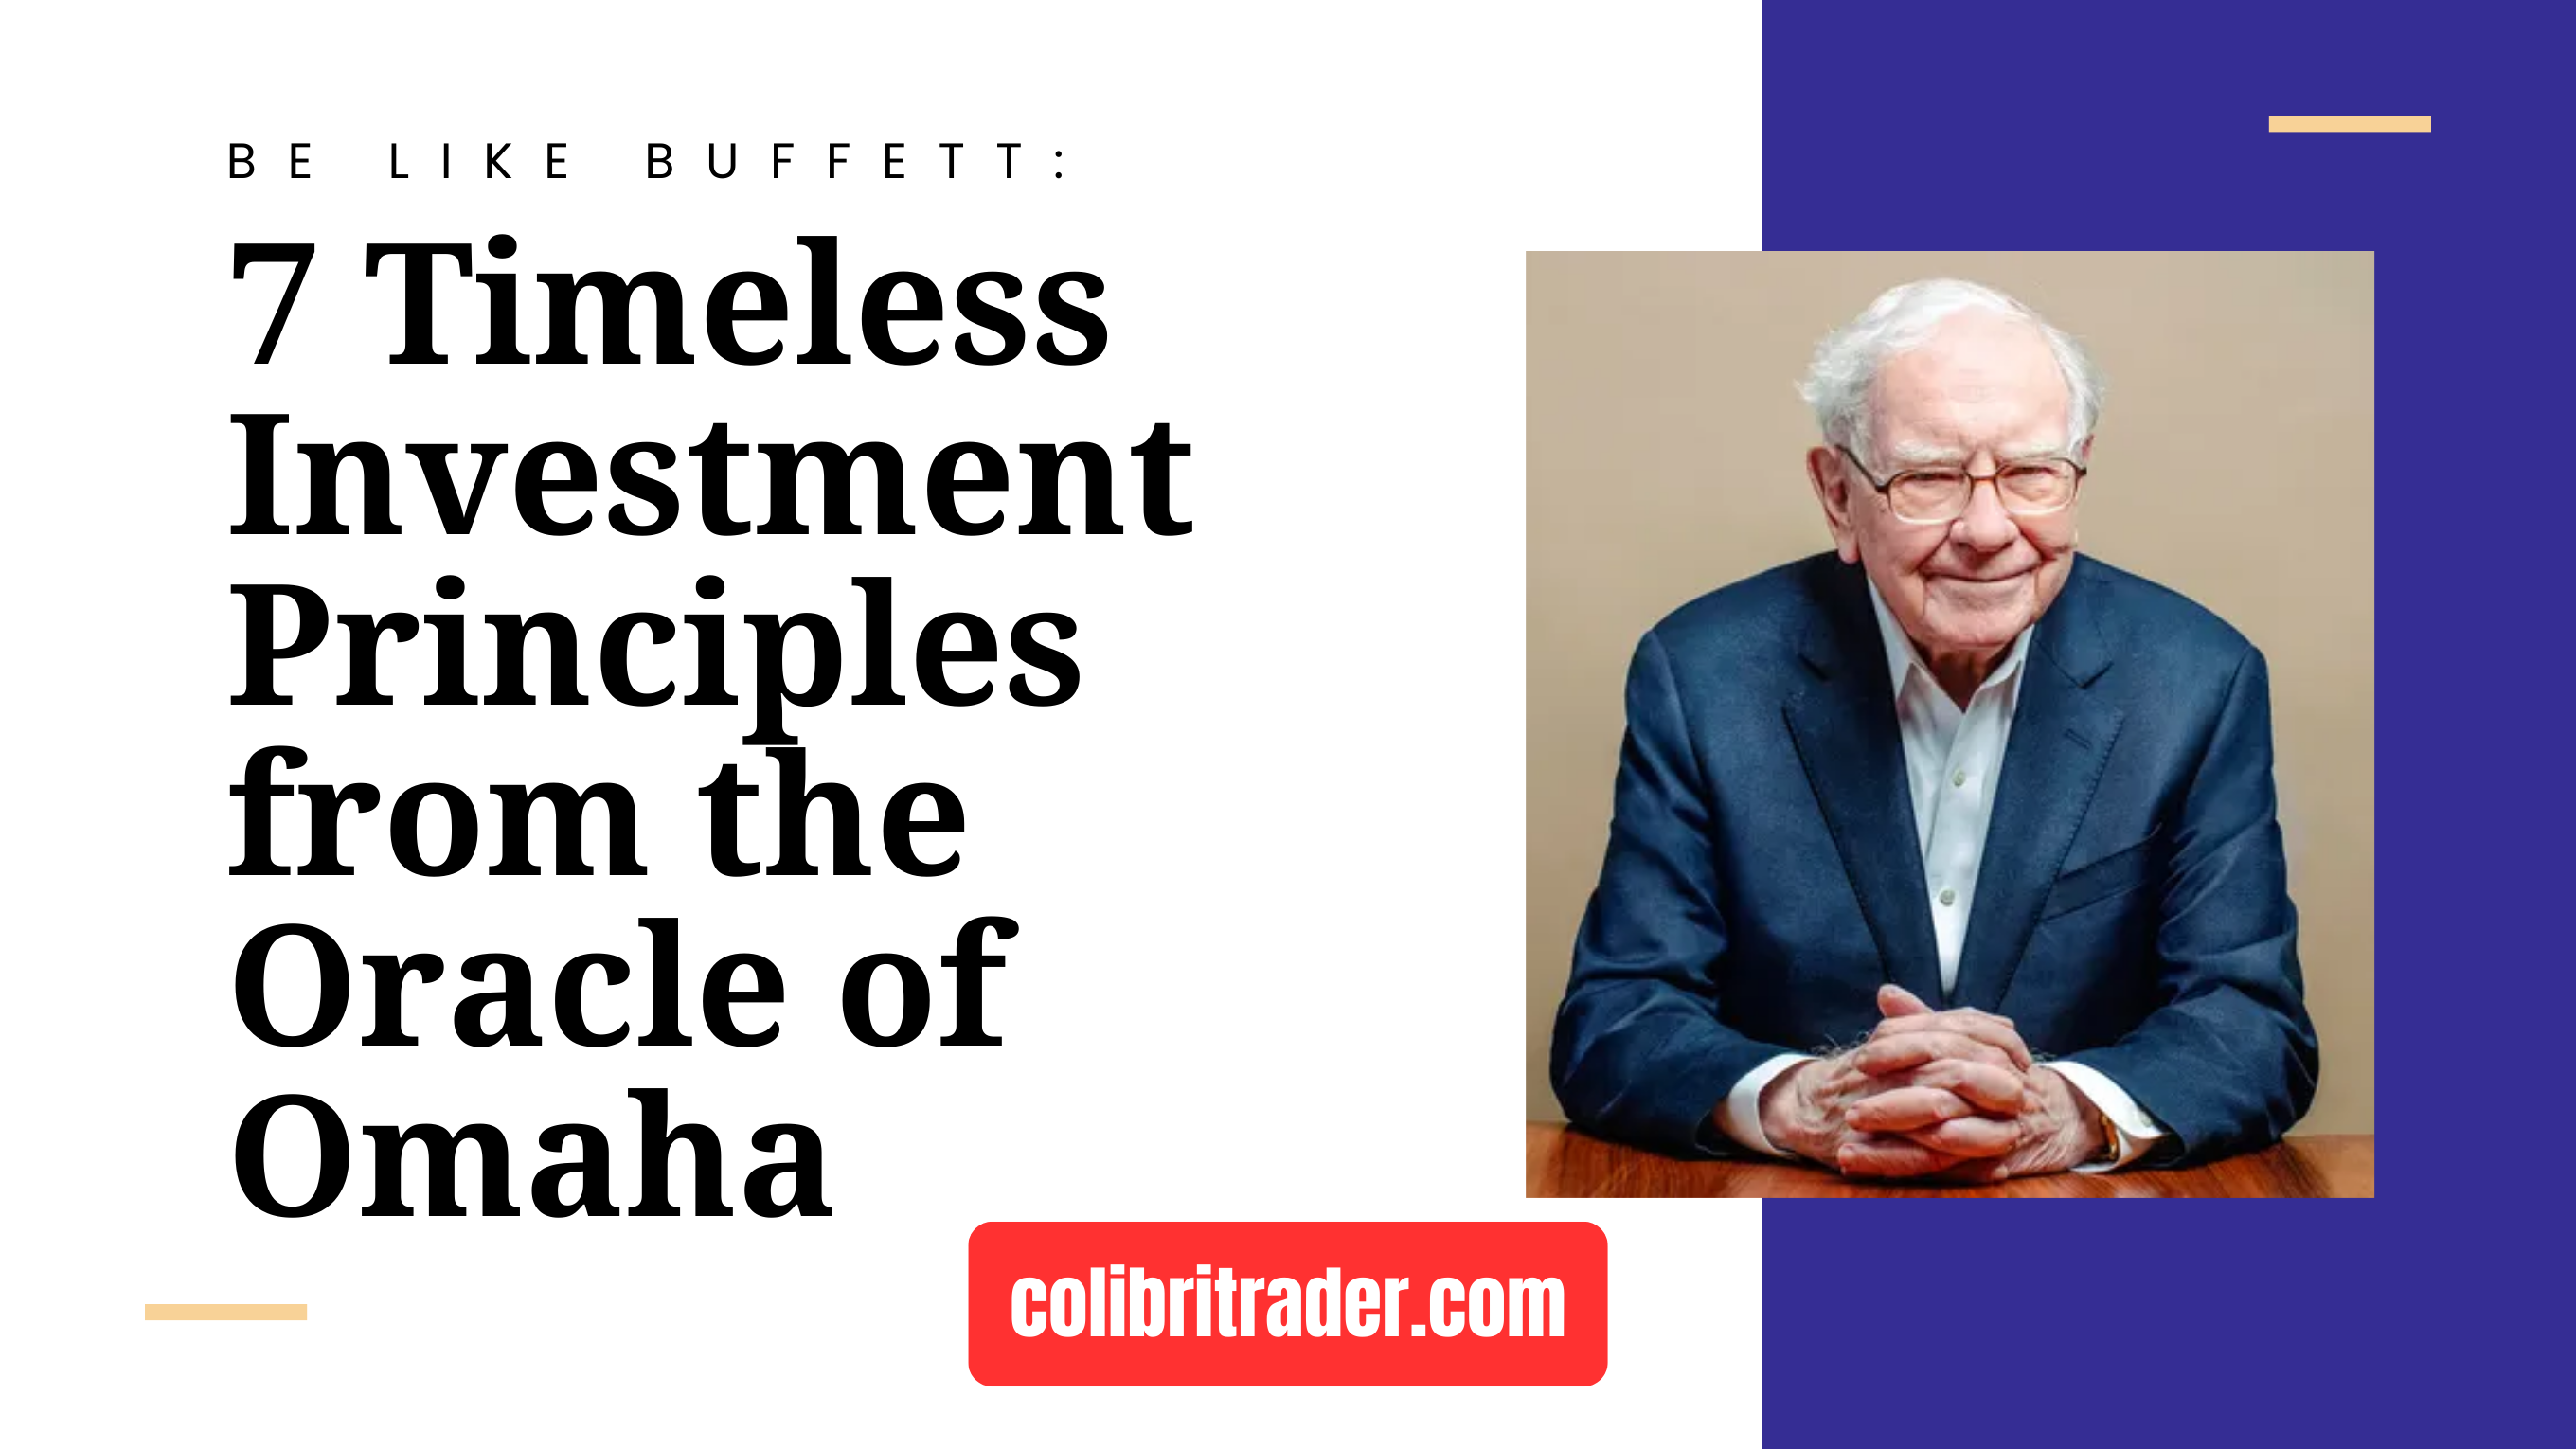 Be Like Buffett: 7 Timeless Investment Principles from the Oracle of Omaha